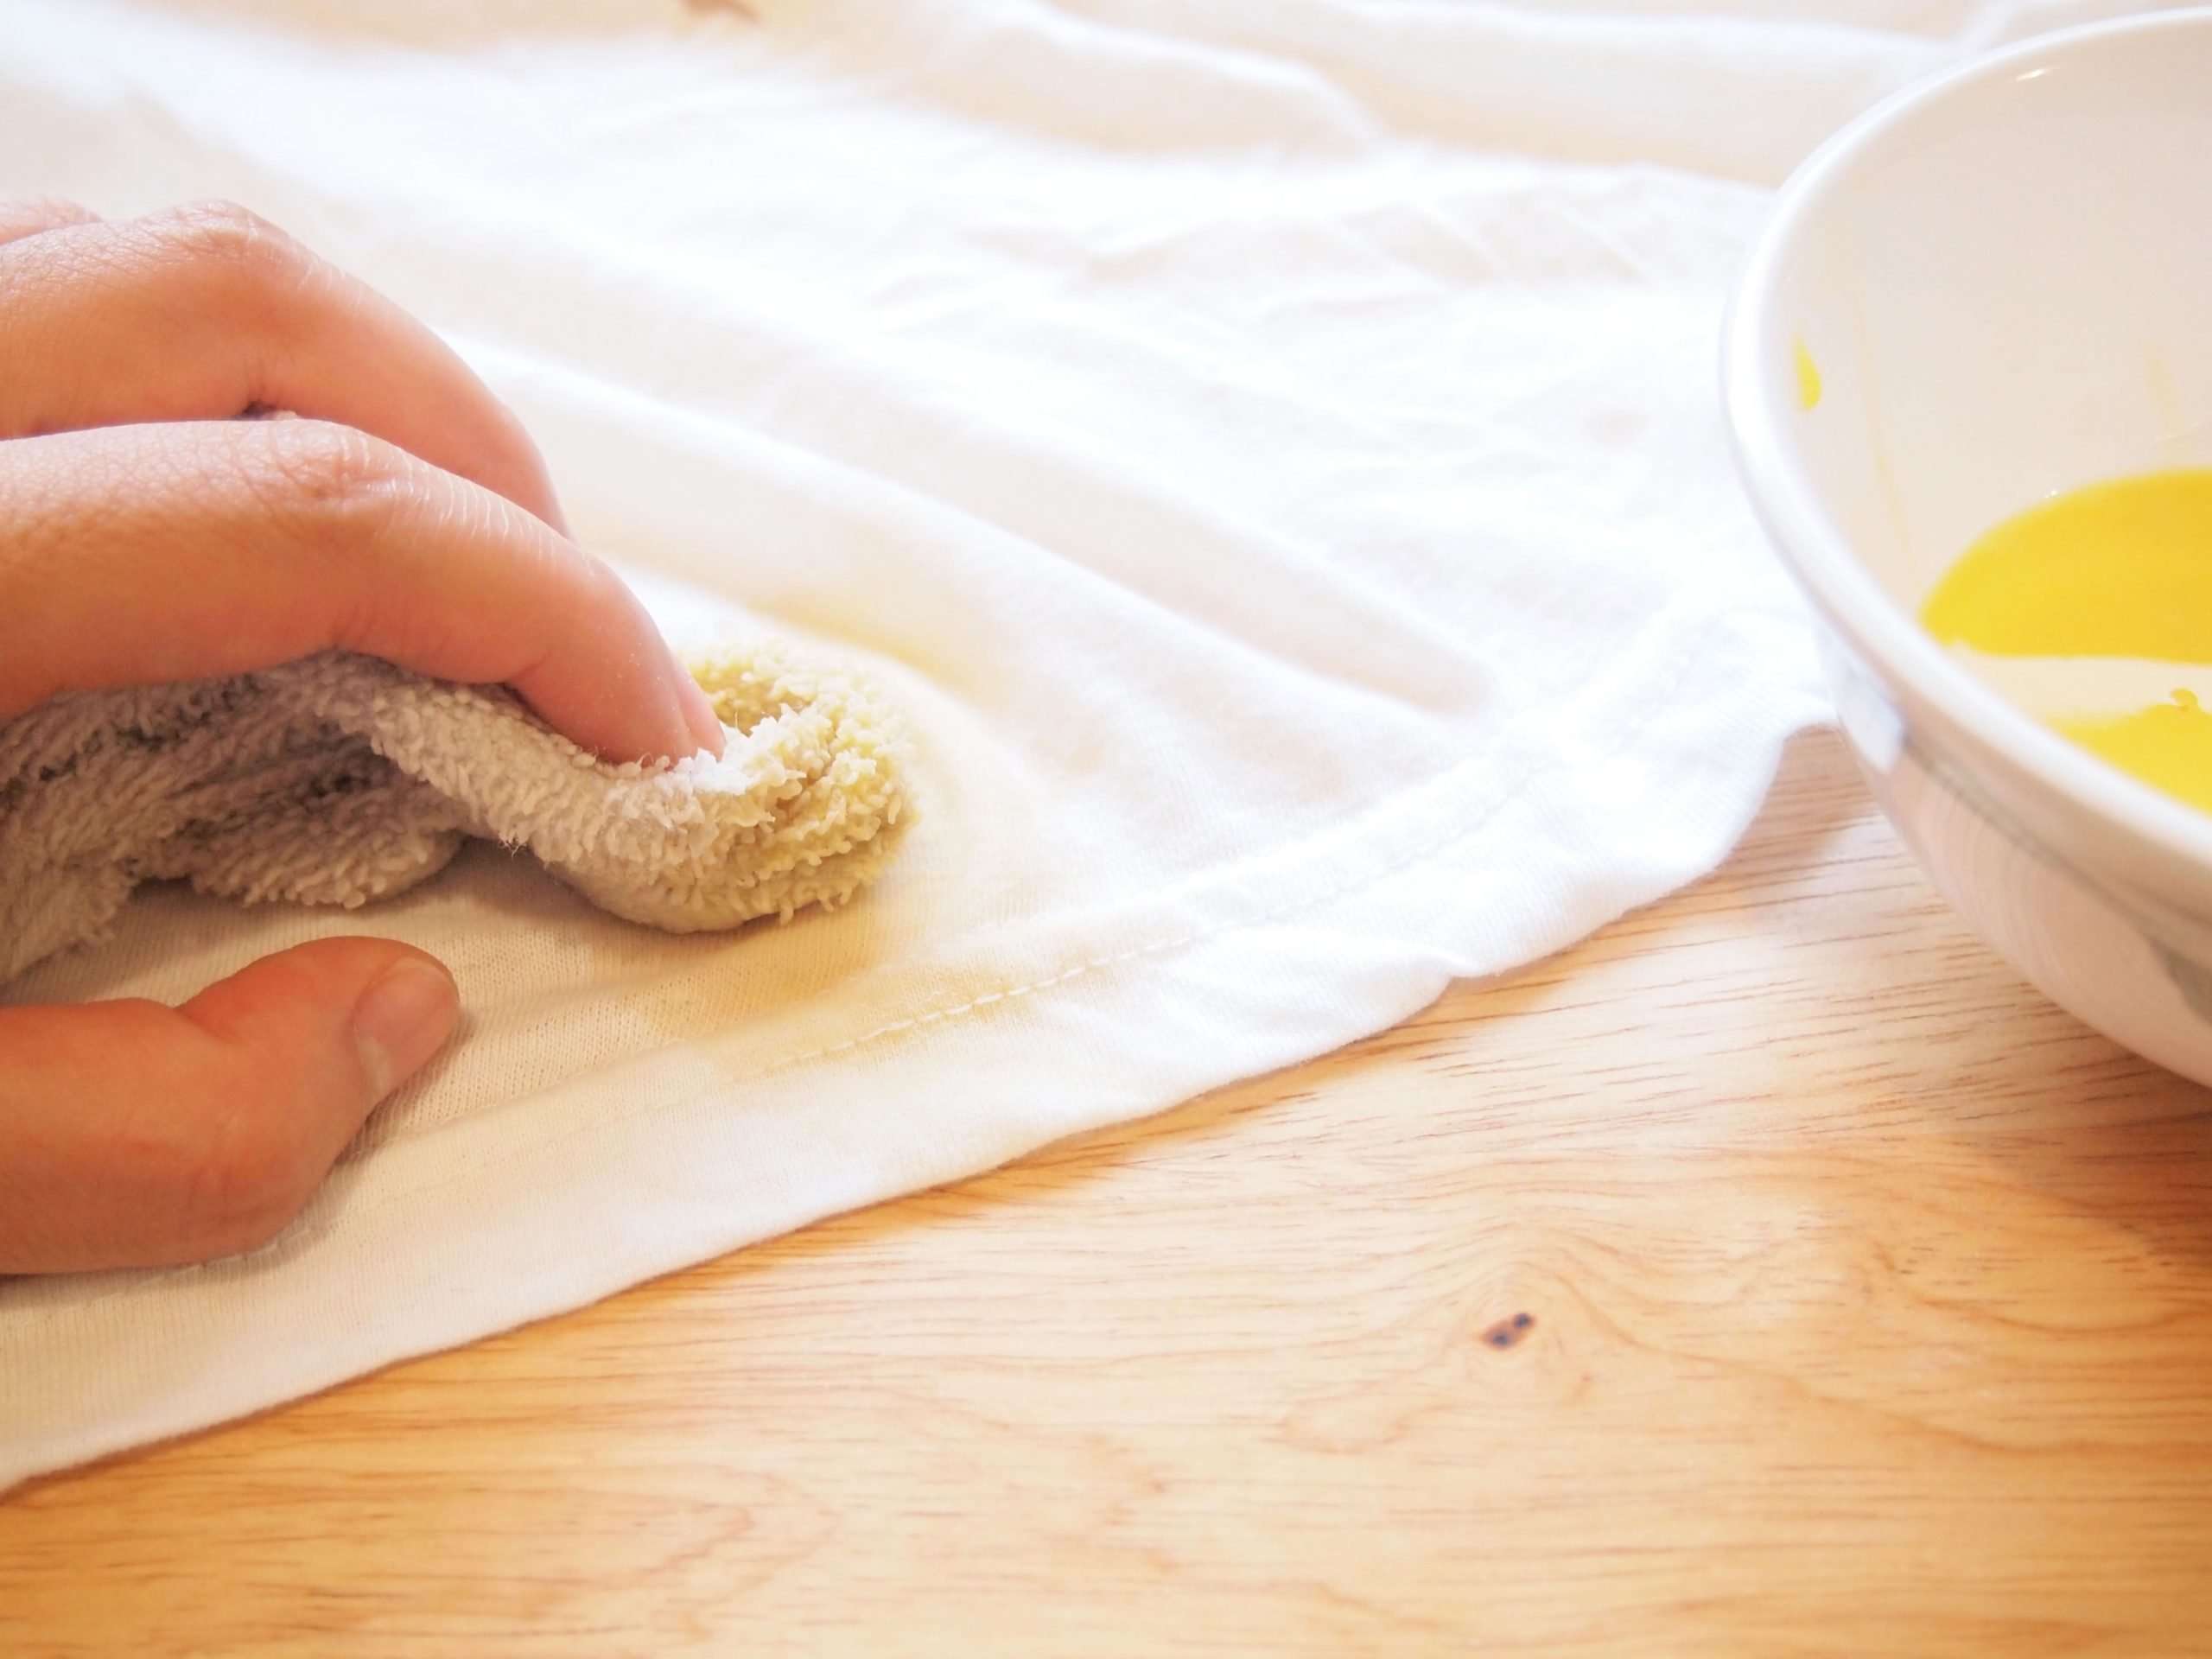 How to Remove a Coffee Stain from a Cotton Shirt